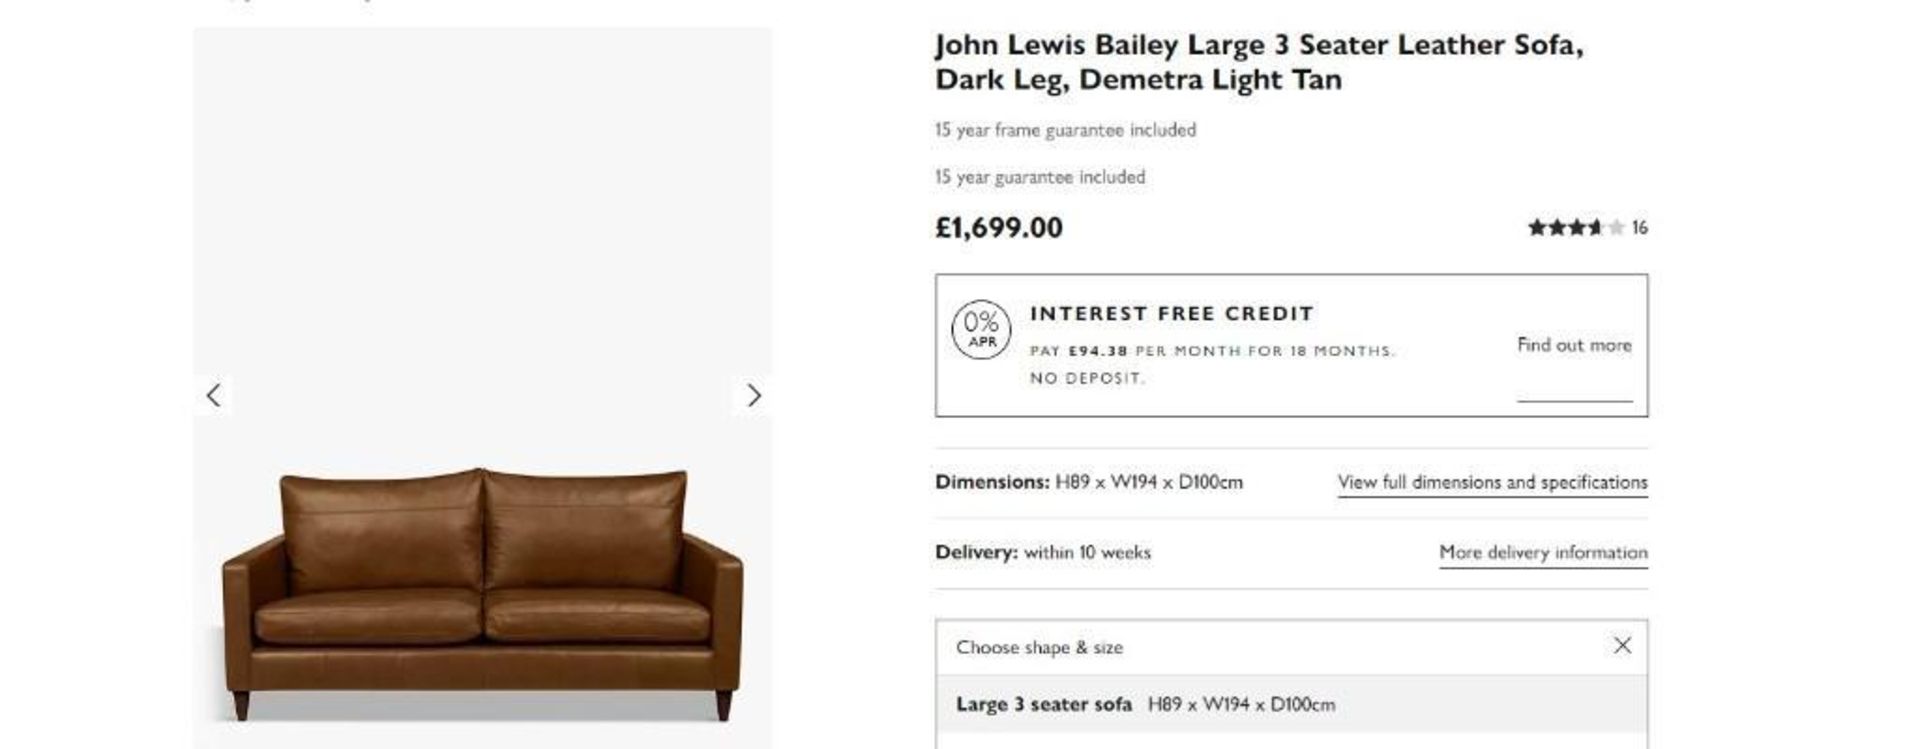 BRAND NEW John Lewis Bailey full leather 3 + 2 sofa in Tan. RRP: £3,298 - Image 5 of 5